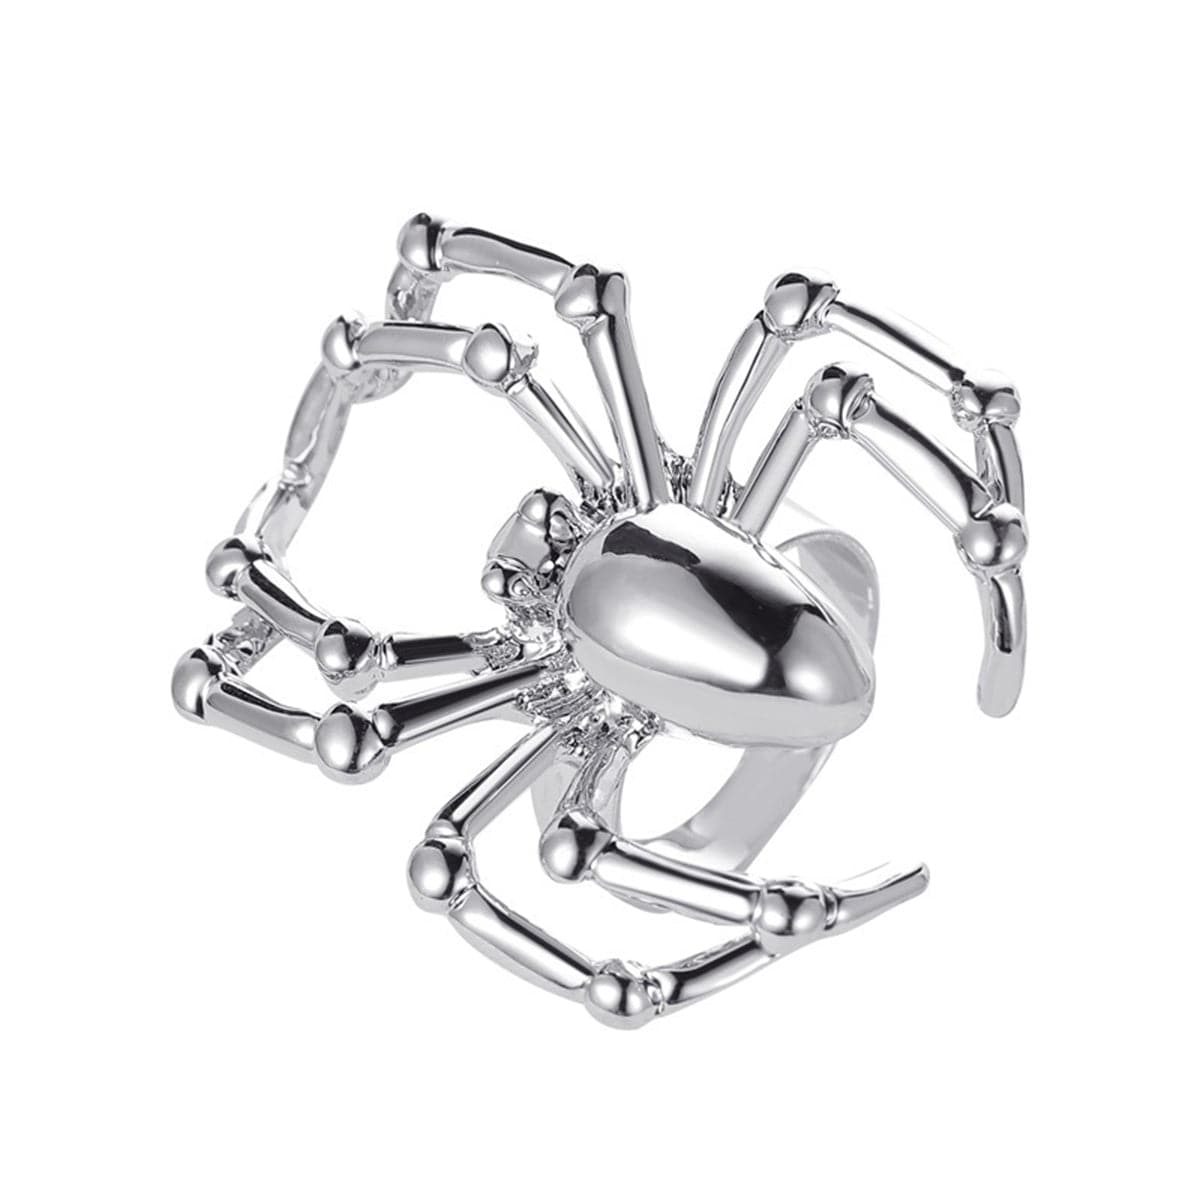 Silver-Plated Spider Adjustable Ring